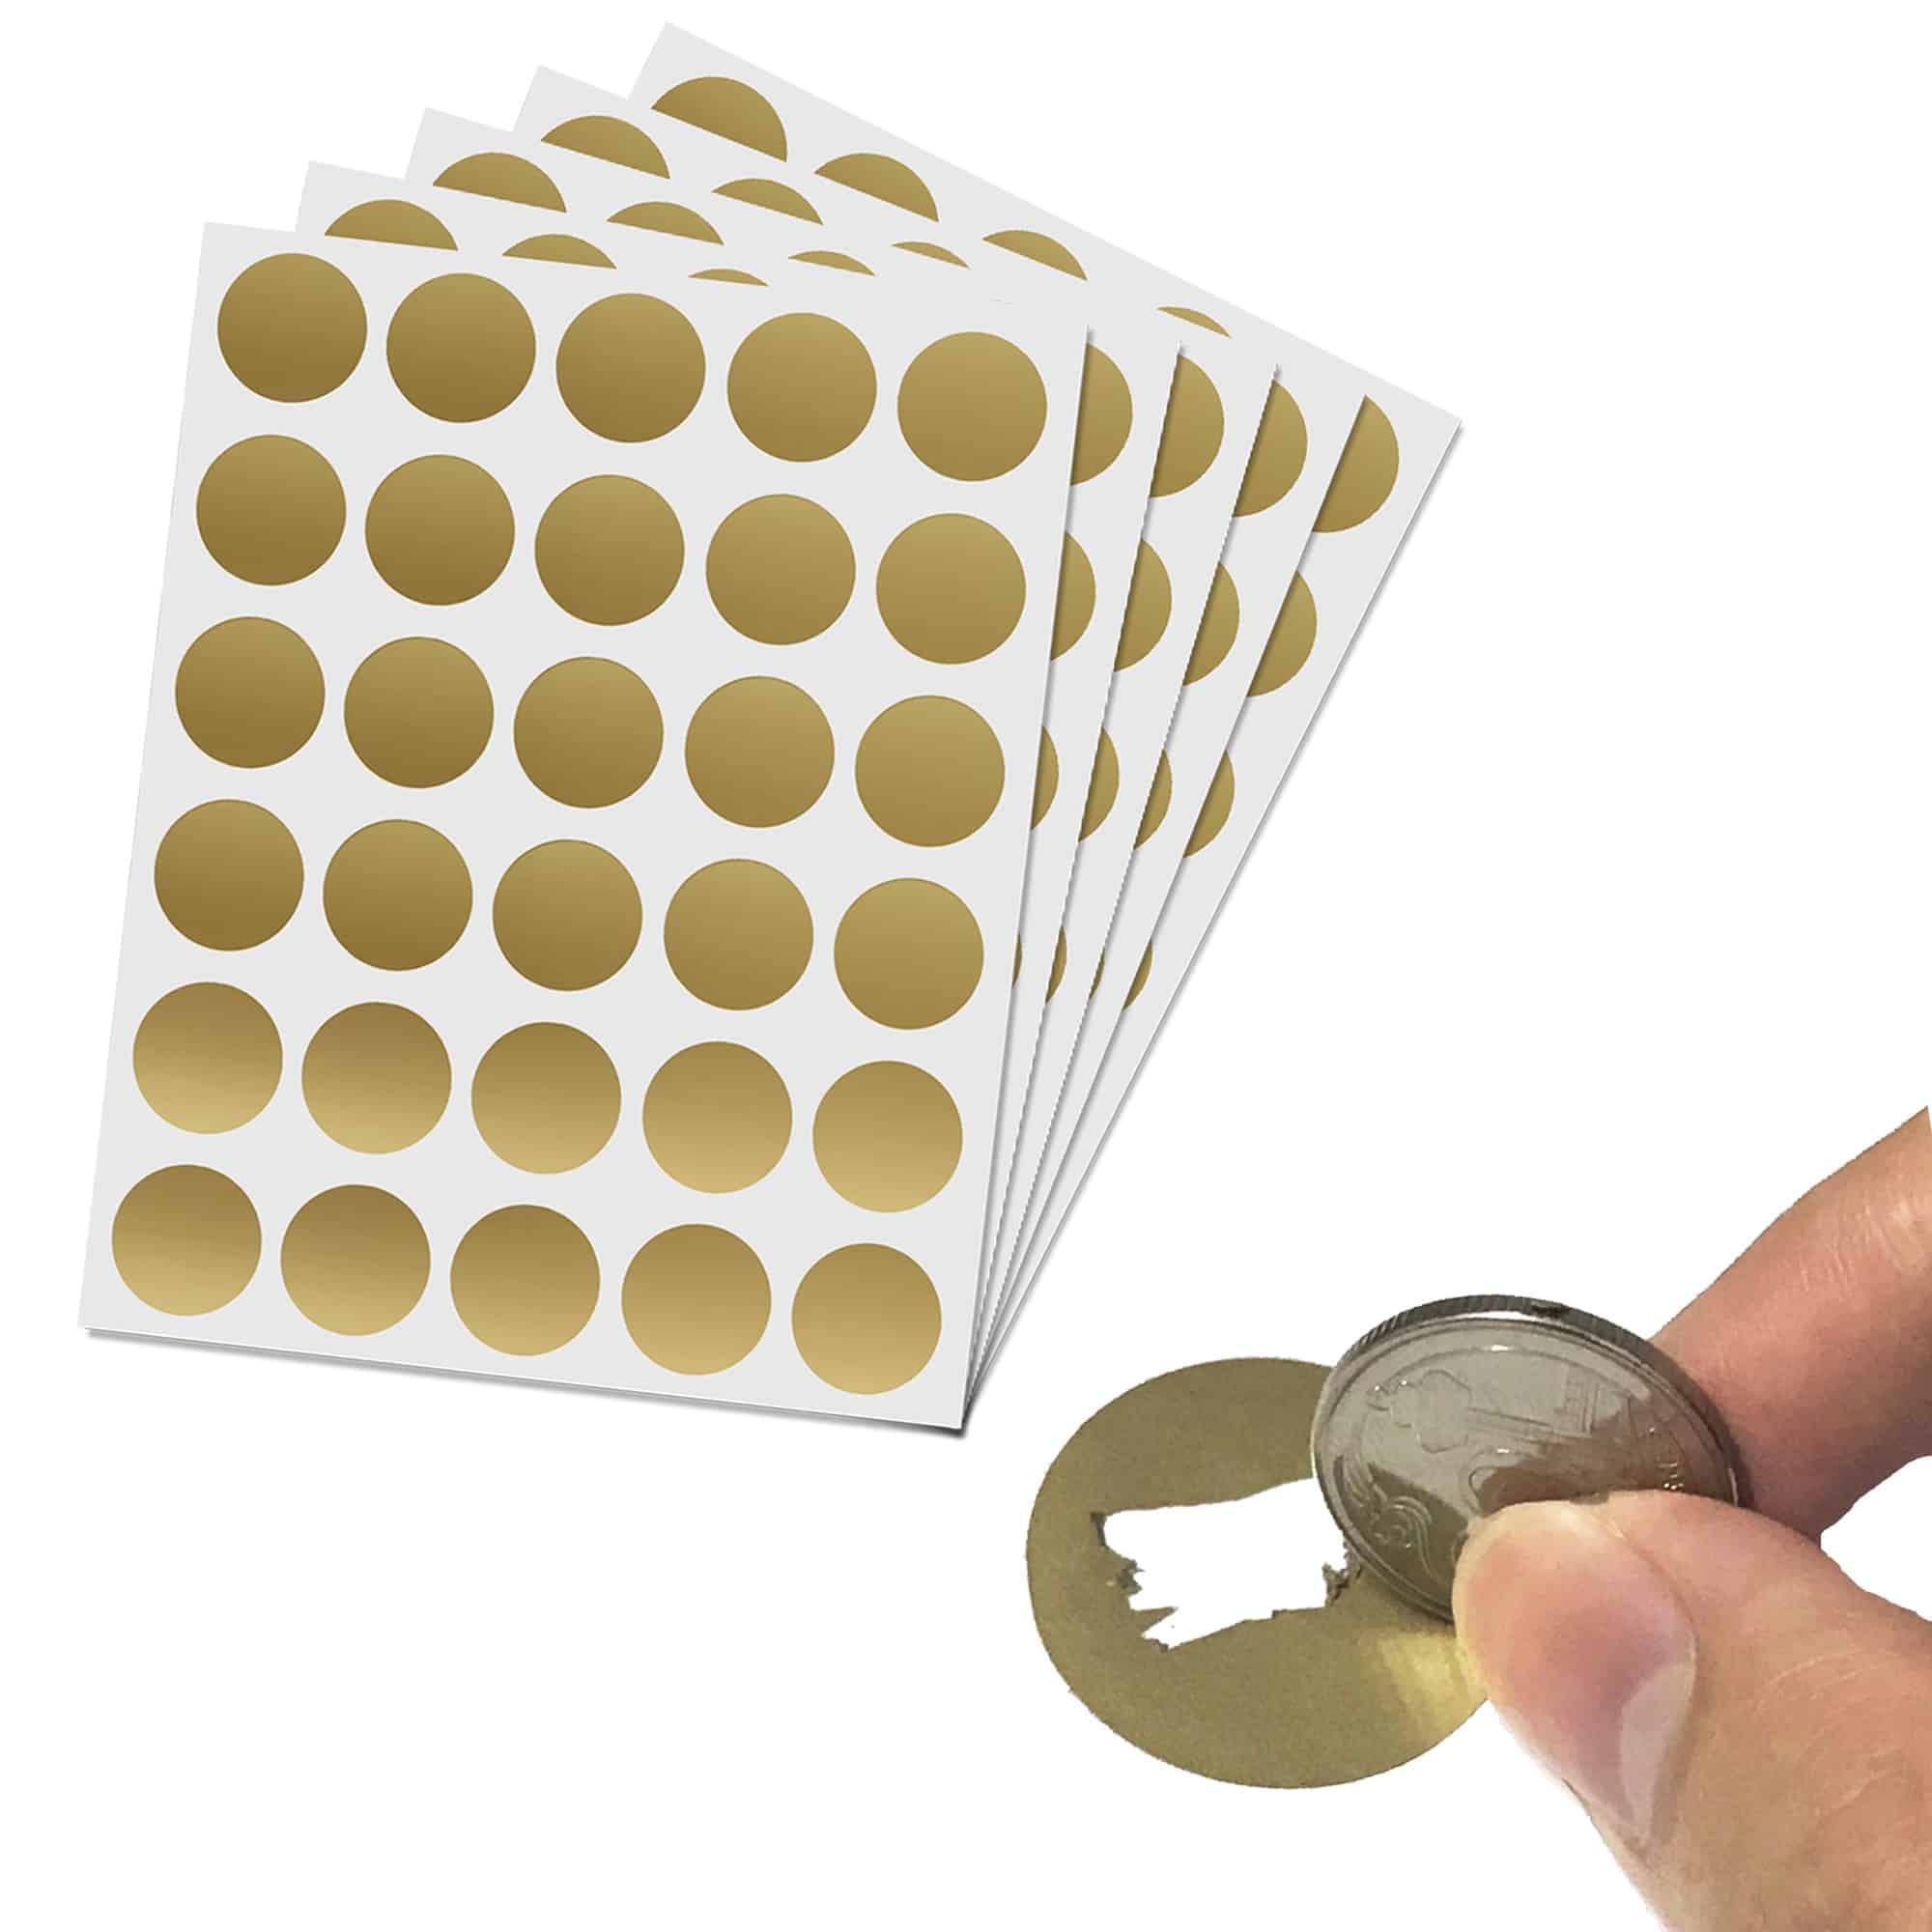 1 x 2 Inch Gold Rectangle Scratch Off Sticker Labels Lottery Raffle Ticket DIY 100 Pack My Scratch Offs 